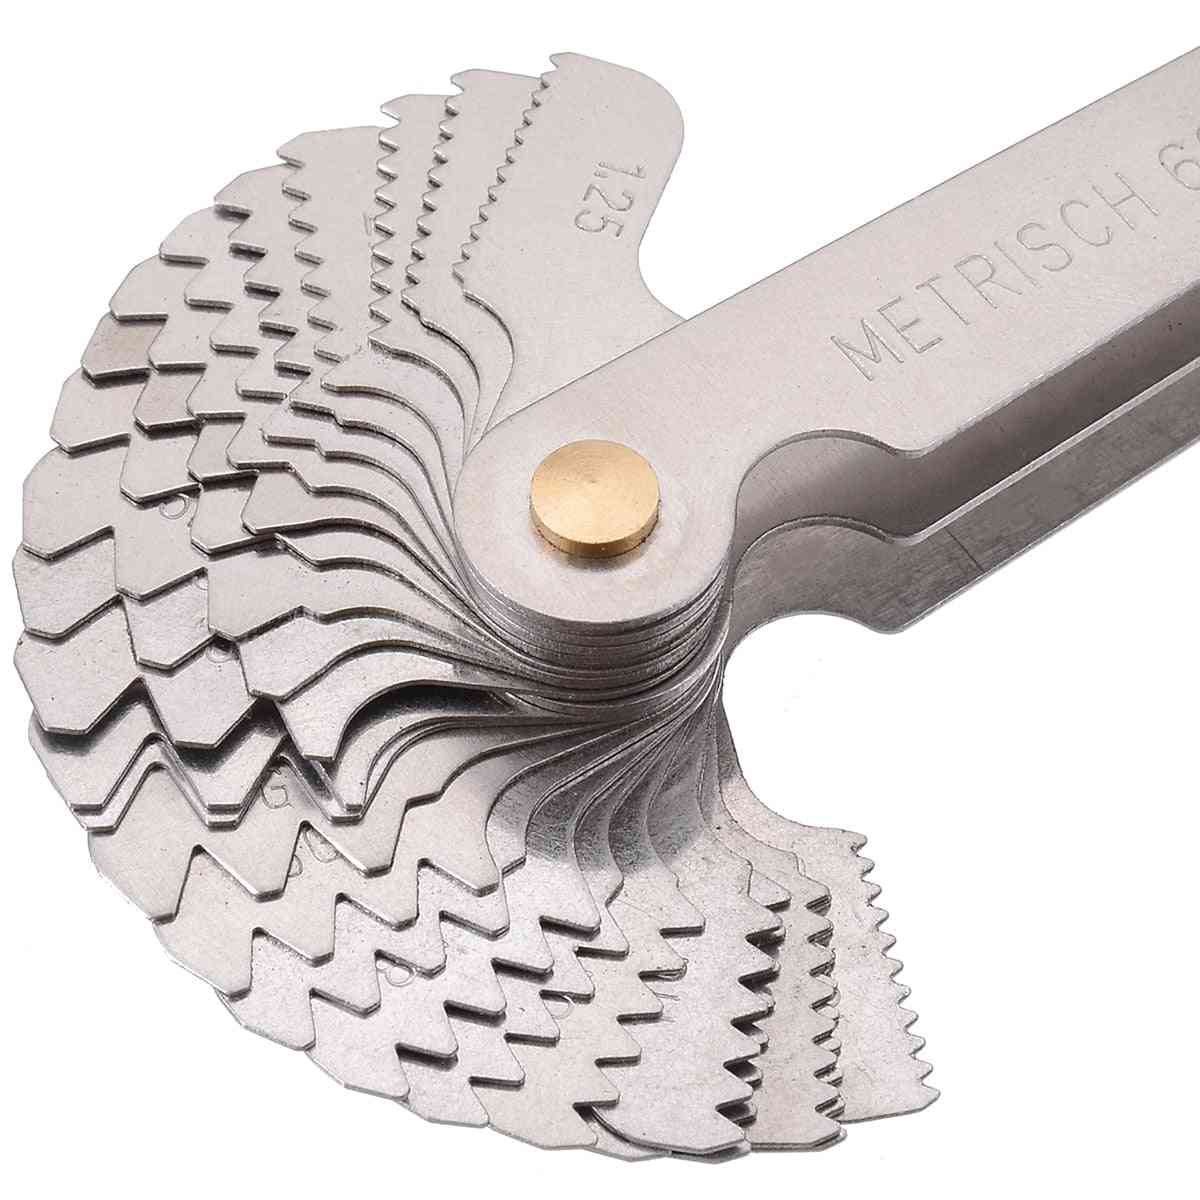 Whitworth Metric Screw Thread Pitch Gauge Blade For Measuring Tool